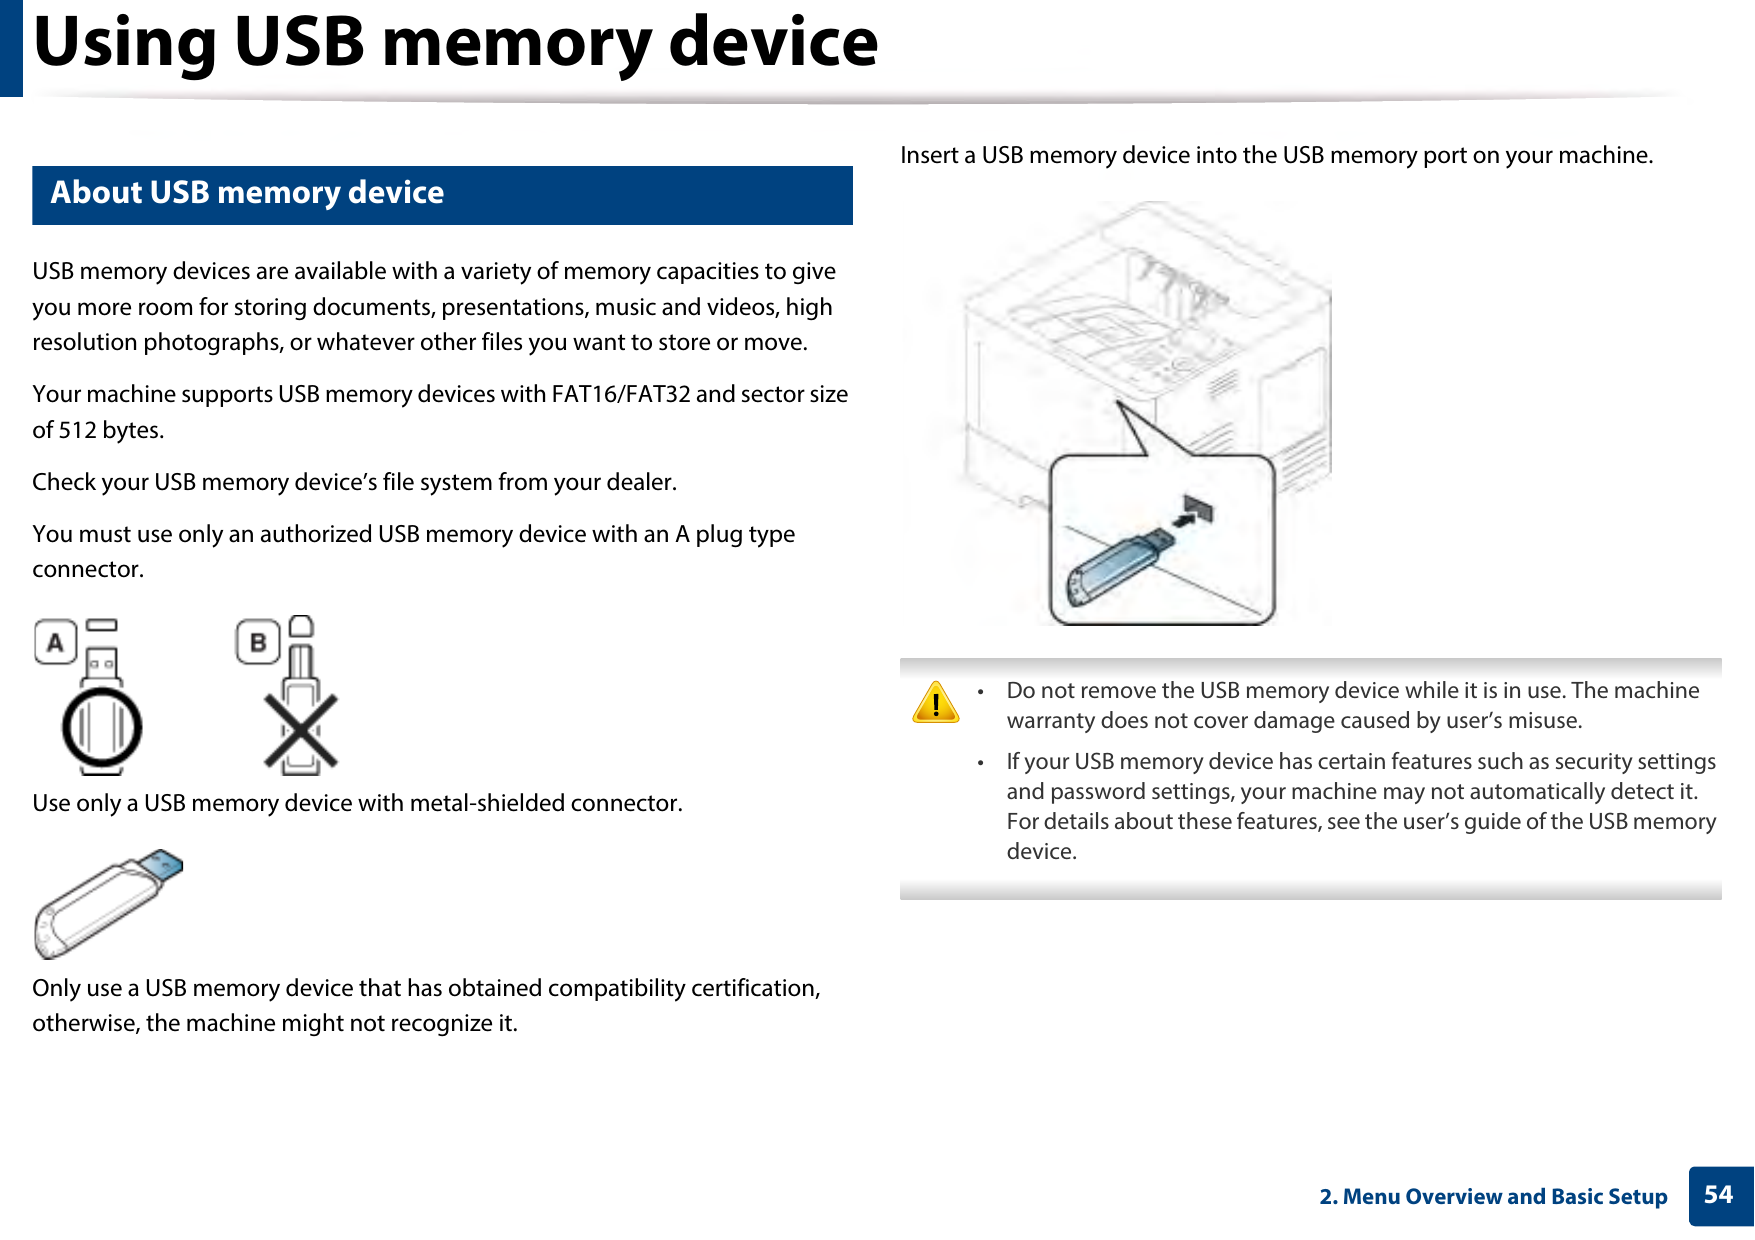 542. Menu Overview and Basic SetupUsing USB memory device14 About USB memory deviceUSB memory devices are available with a variety of memory capacities to give you more room for storing documents, presentations, music and videos, high resolution photographs, or whatever other files you want to store or move.Your machine supports USB memory devices with FAT16/FAT32 and sector size of 512 bytes.Check your USB memory device’s file system from your dealer.You must use only an authorized USB memory device with an A plug type connector.Use only a USB memory device with metal-shielded connector.Only use a USB memory device that has obtained compatibility certification, otherwise, the machine might not recognize it.Insert a USB memory device into the USB memory port on your machine. • Do not remove the USB memory device while it is in use. The machine warranty does not cover damage caused by user’s misuse.• If your USB memory device has certain features such as security settings and password settings, your machine may not automatically detect it. For details about these features, see the user’s guide of the USB memory device. 